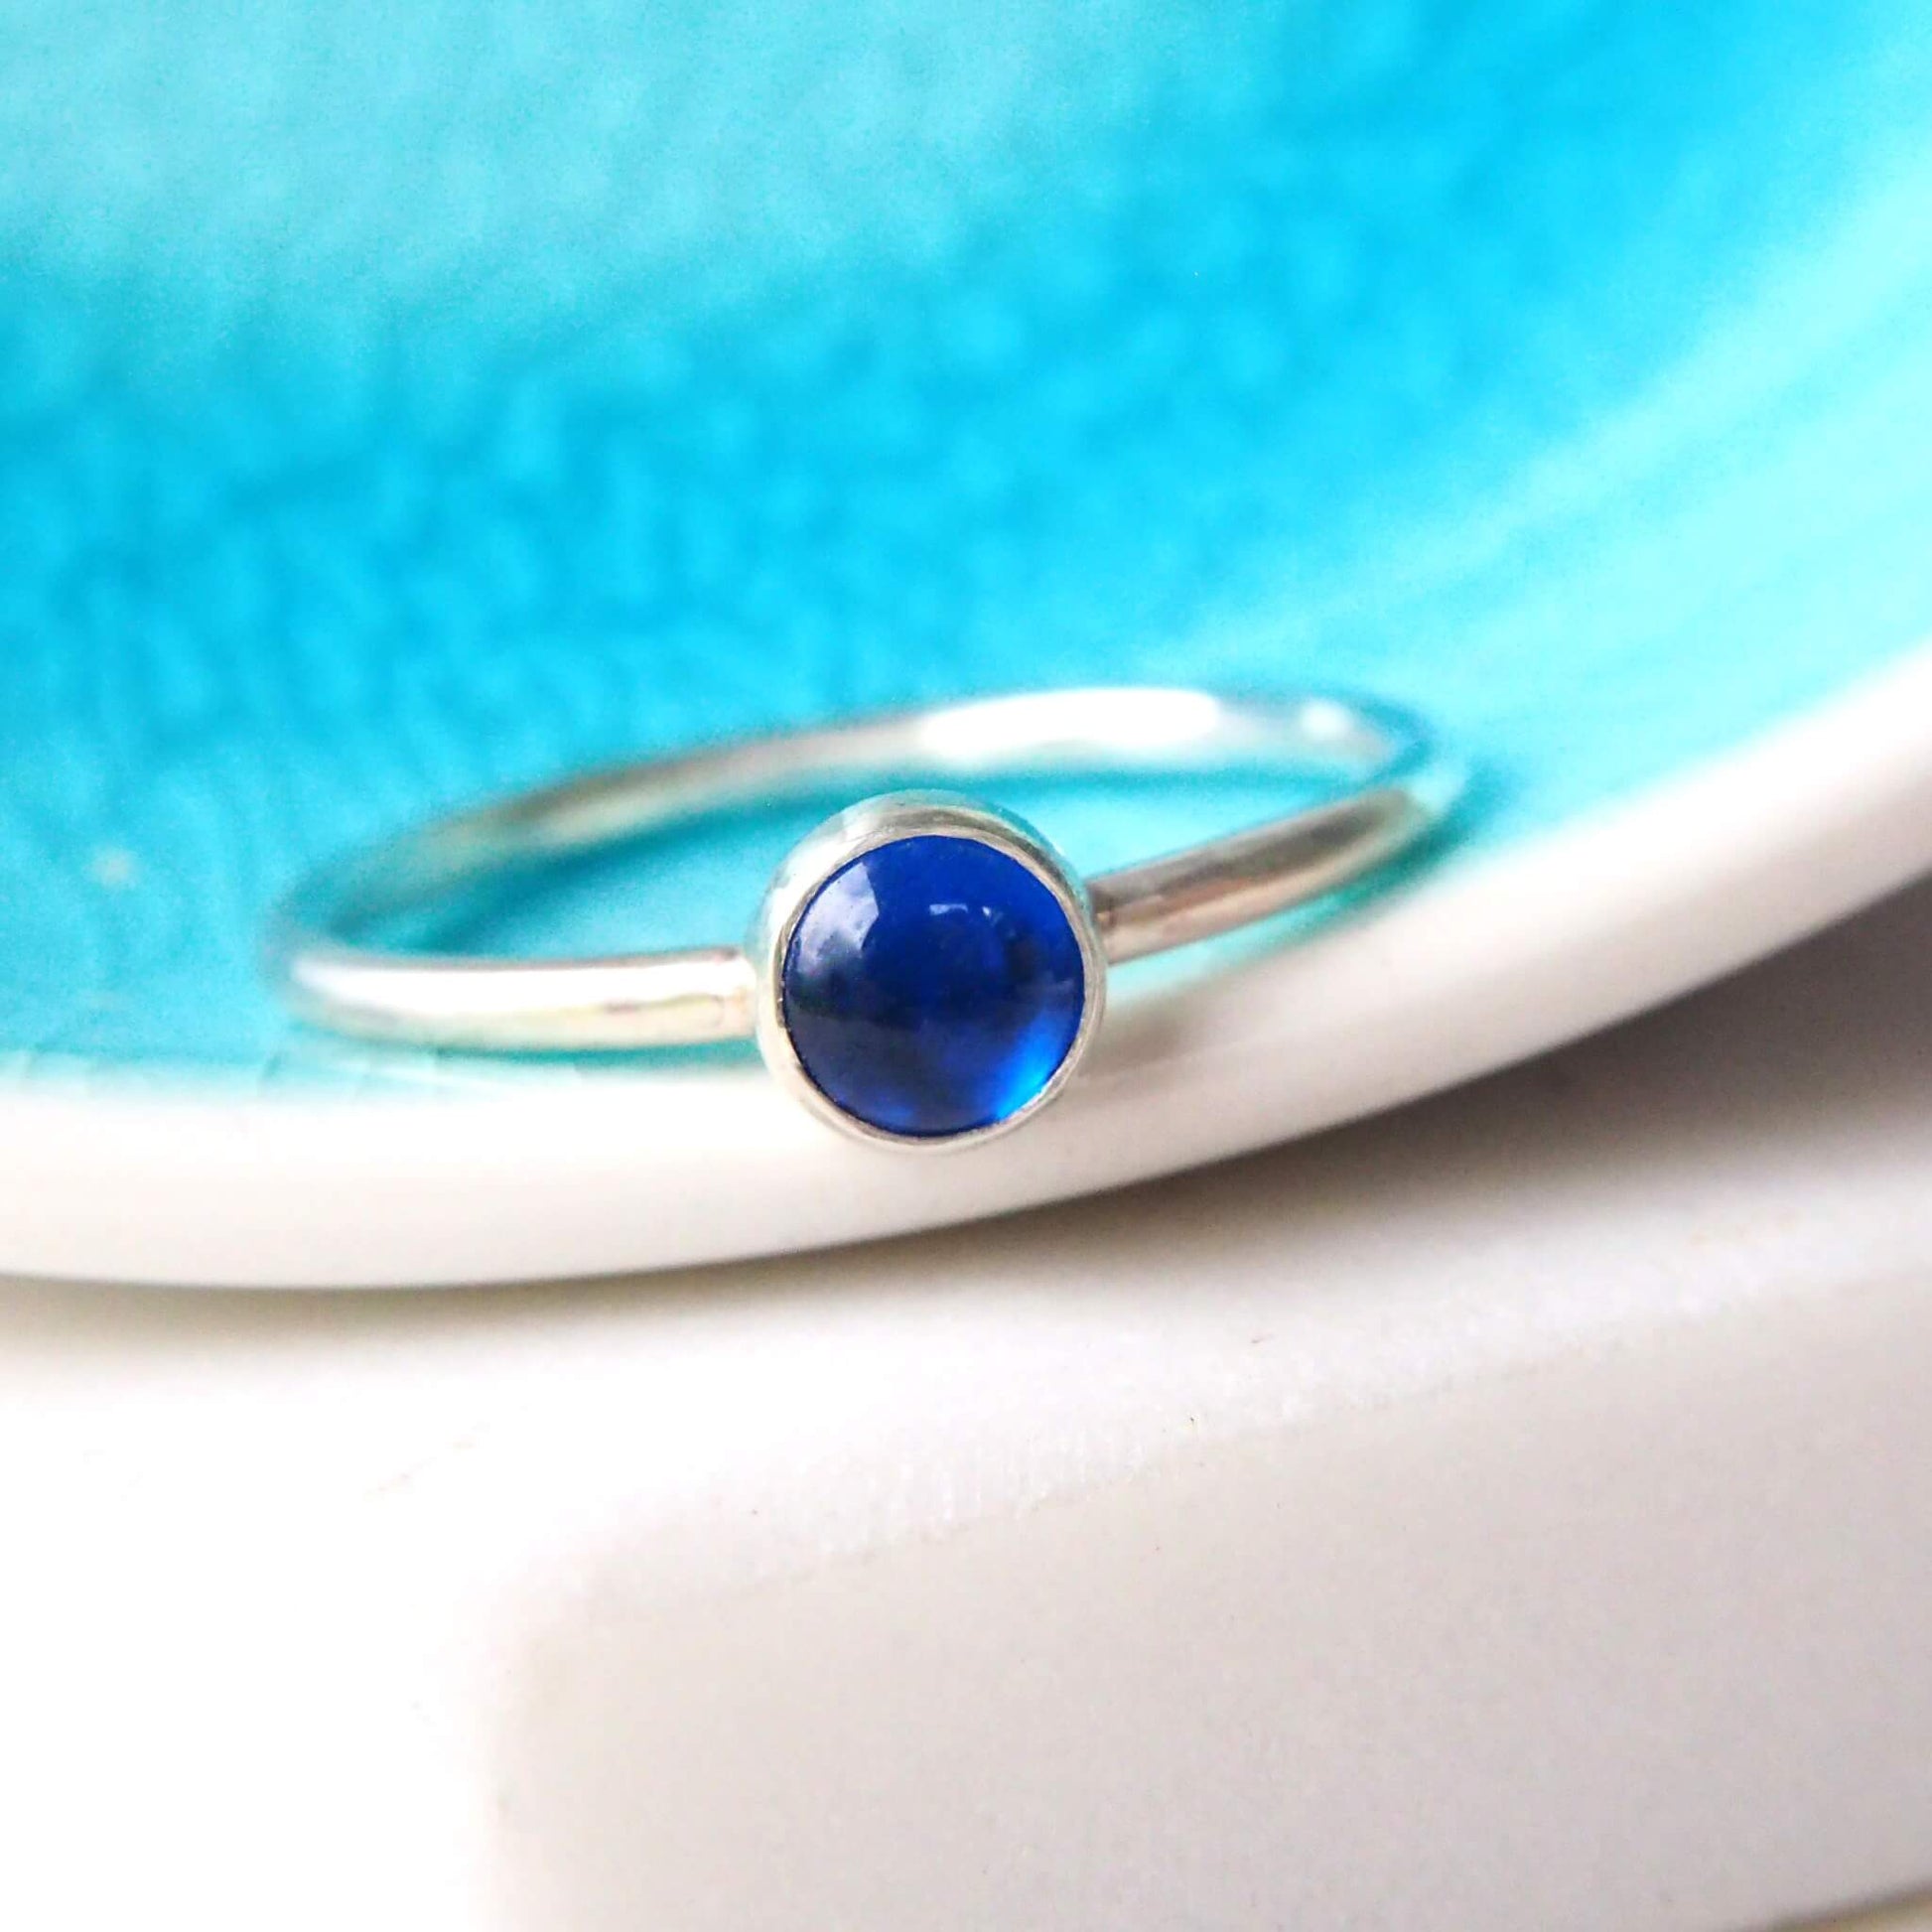 Modern Sapphire solitaire ring pictured on a bright blue ceramic dish. The ring in made in Sterling Silver with a Lab created Sapphire, round in shape in a 5mm size. Made in a modern simple minimalist style by maram jewellery in Edinburgh Scotland